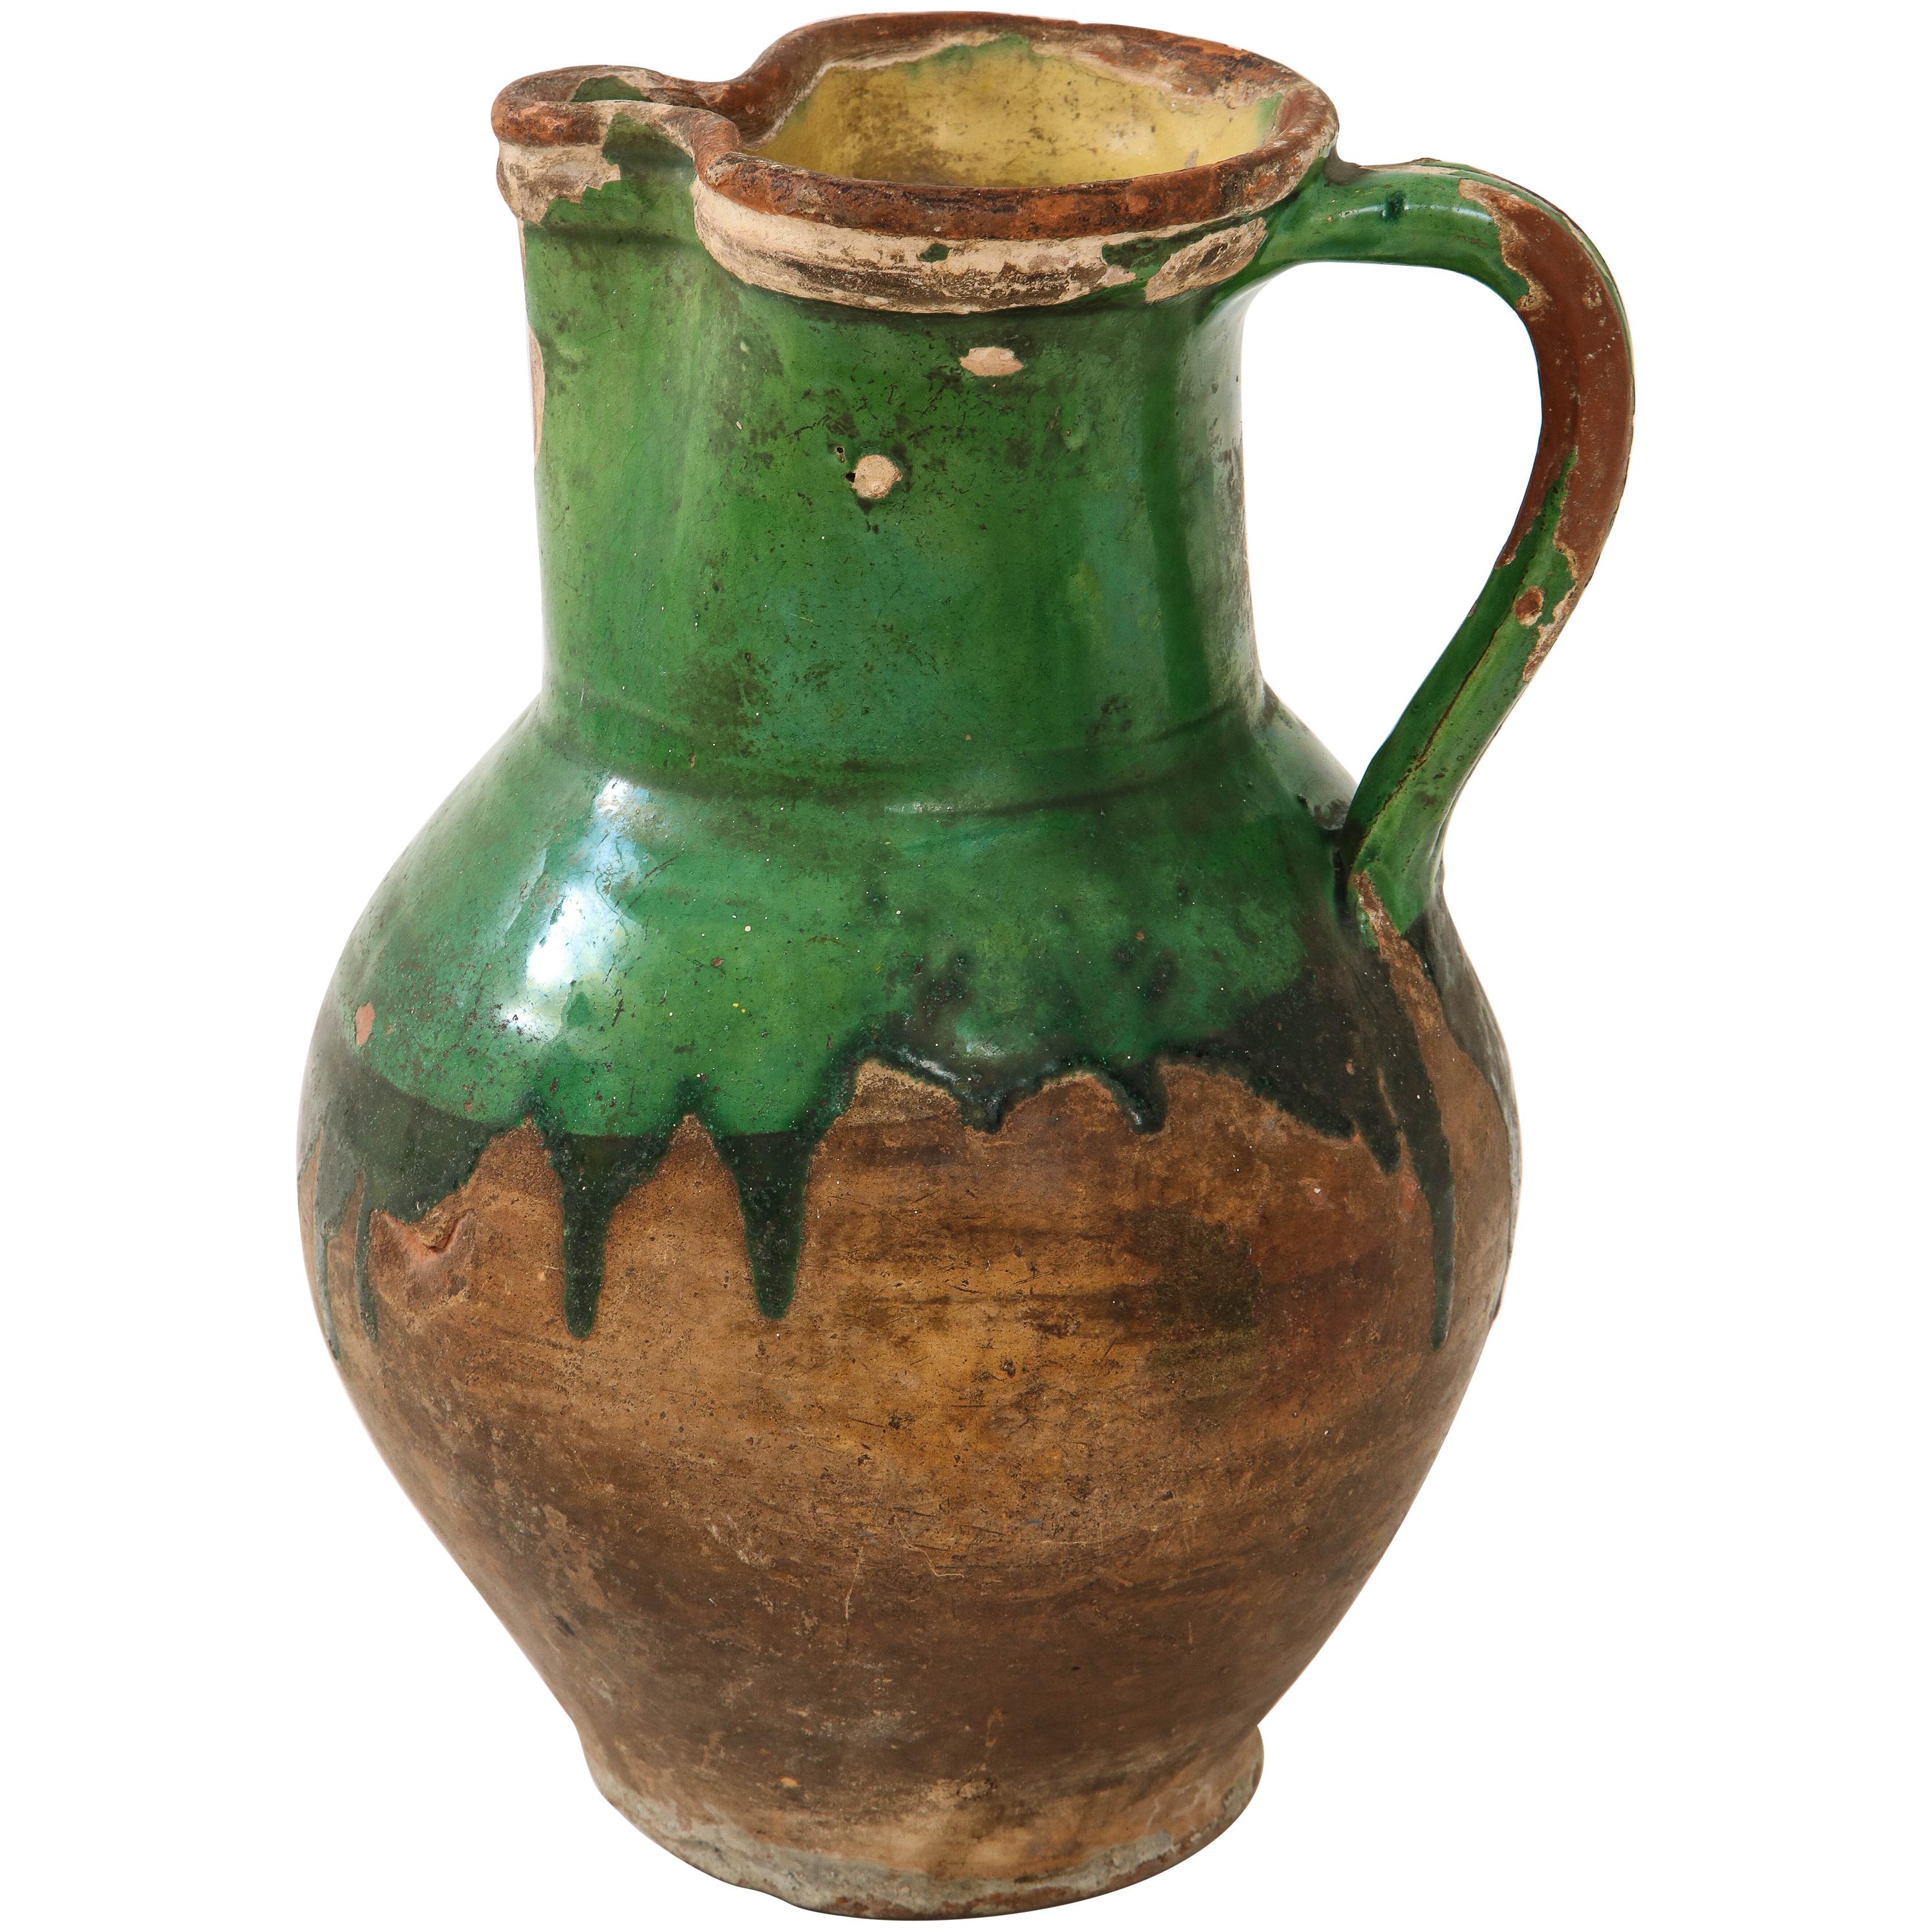 17th Century Earthenware Pitcher with Yellow and Green Glaze, Friesland